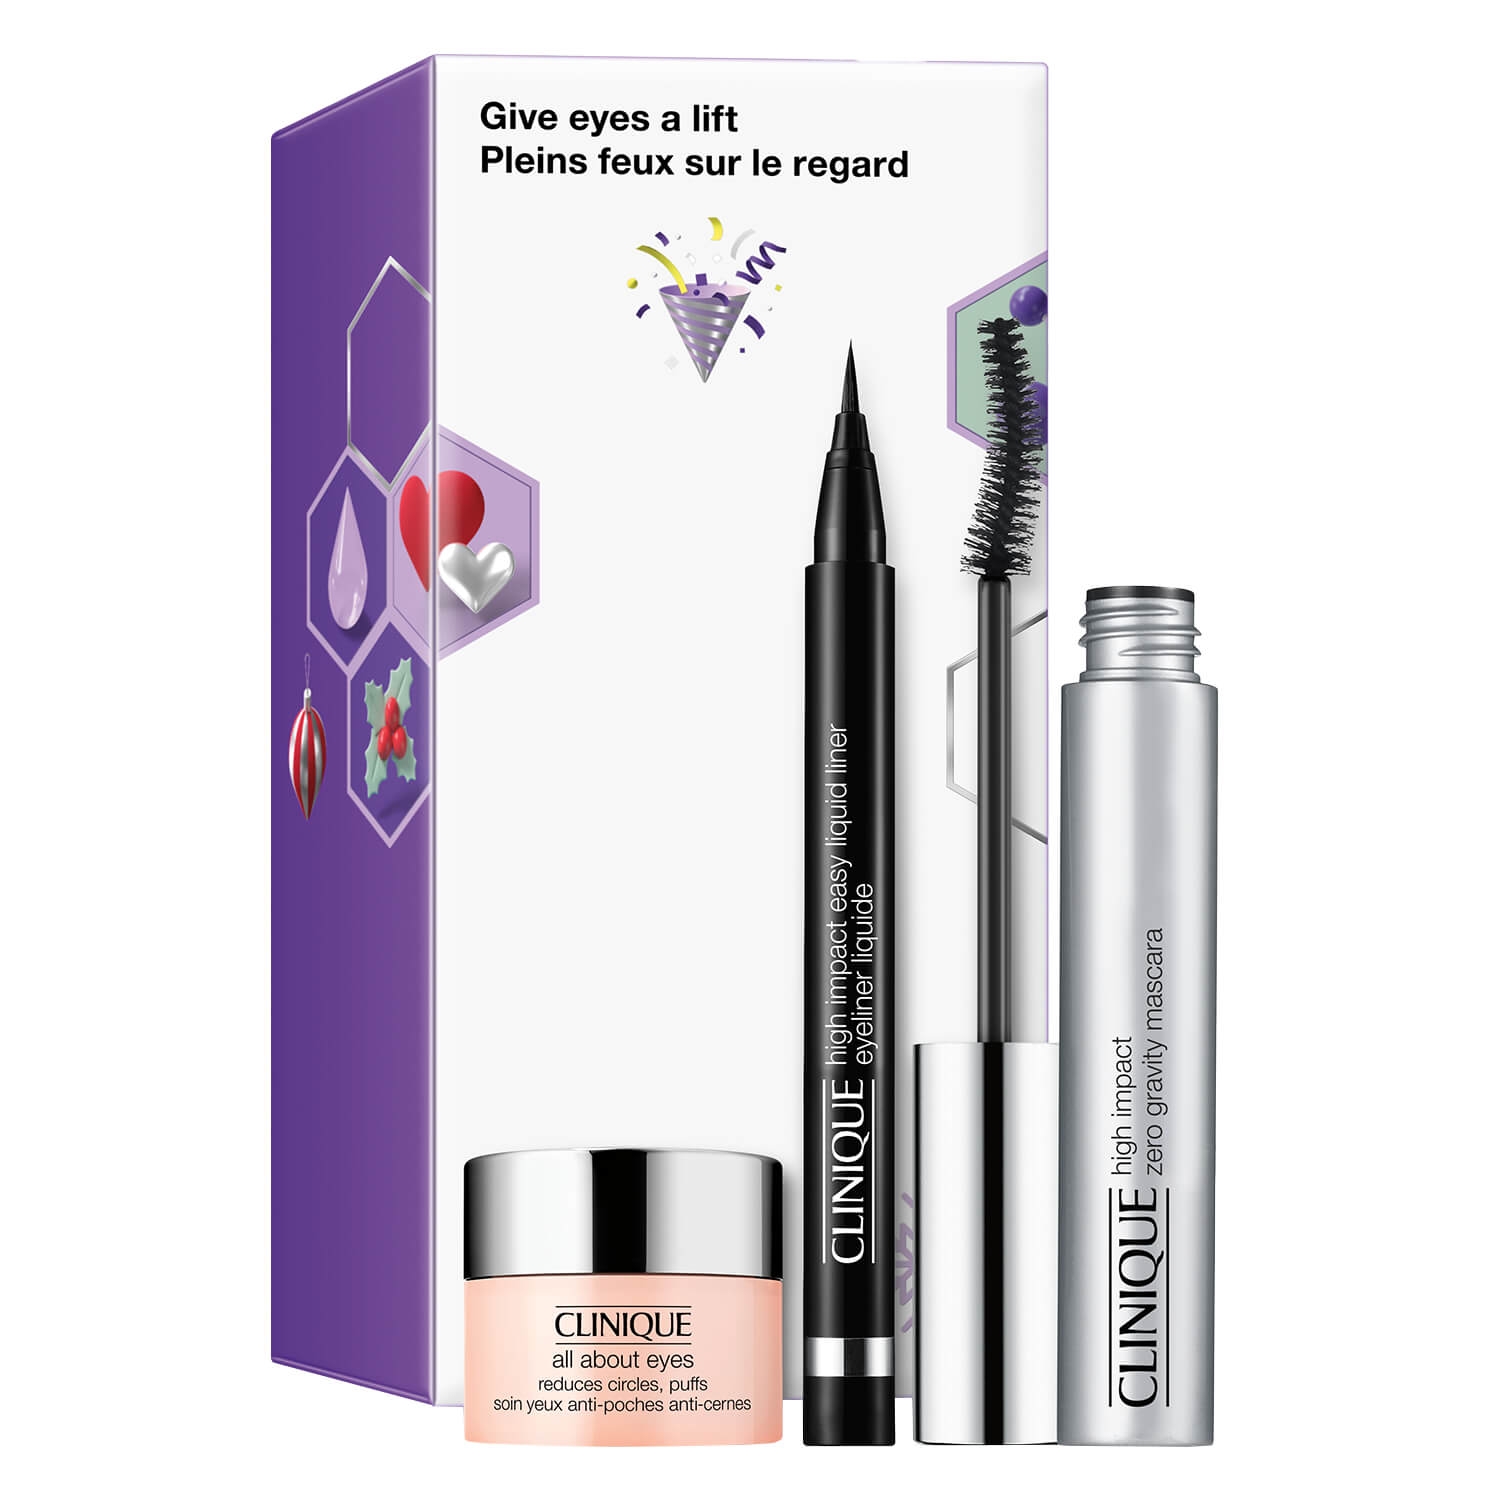 Product image from Clinique Set - Give Eyes a Lift